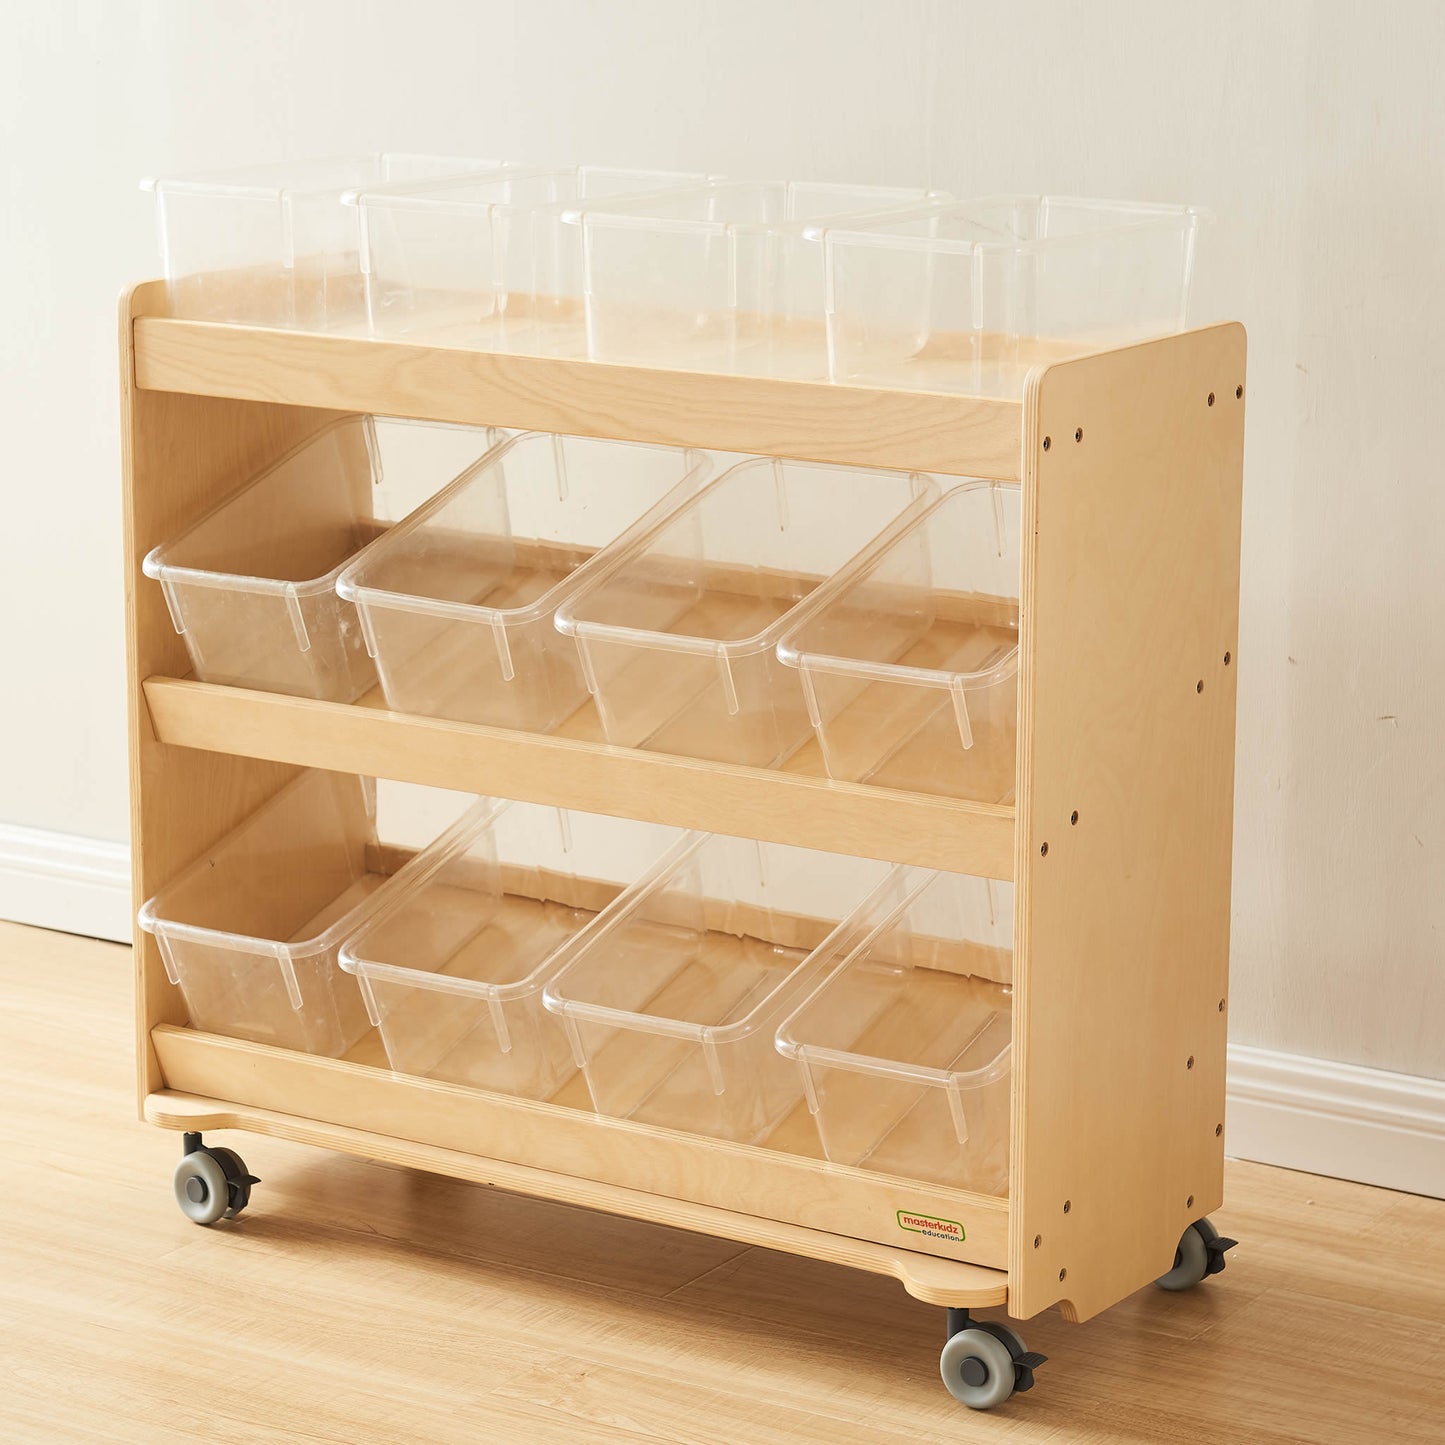 Masterkidz 800H x 880L Mobile Inclined Shelving Unit Trays Not Included 移動 3 層手推車-傾斜層板